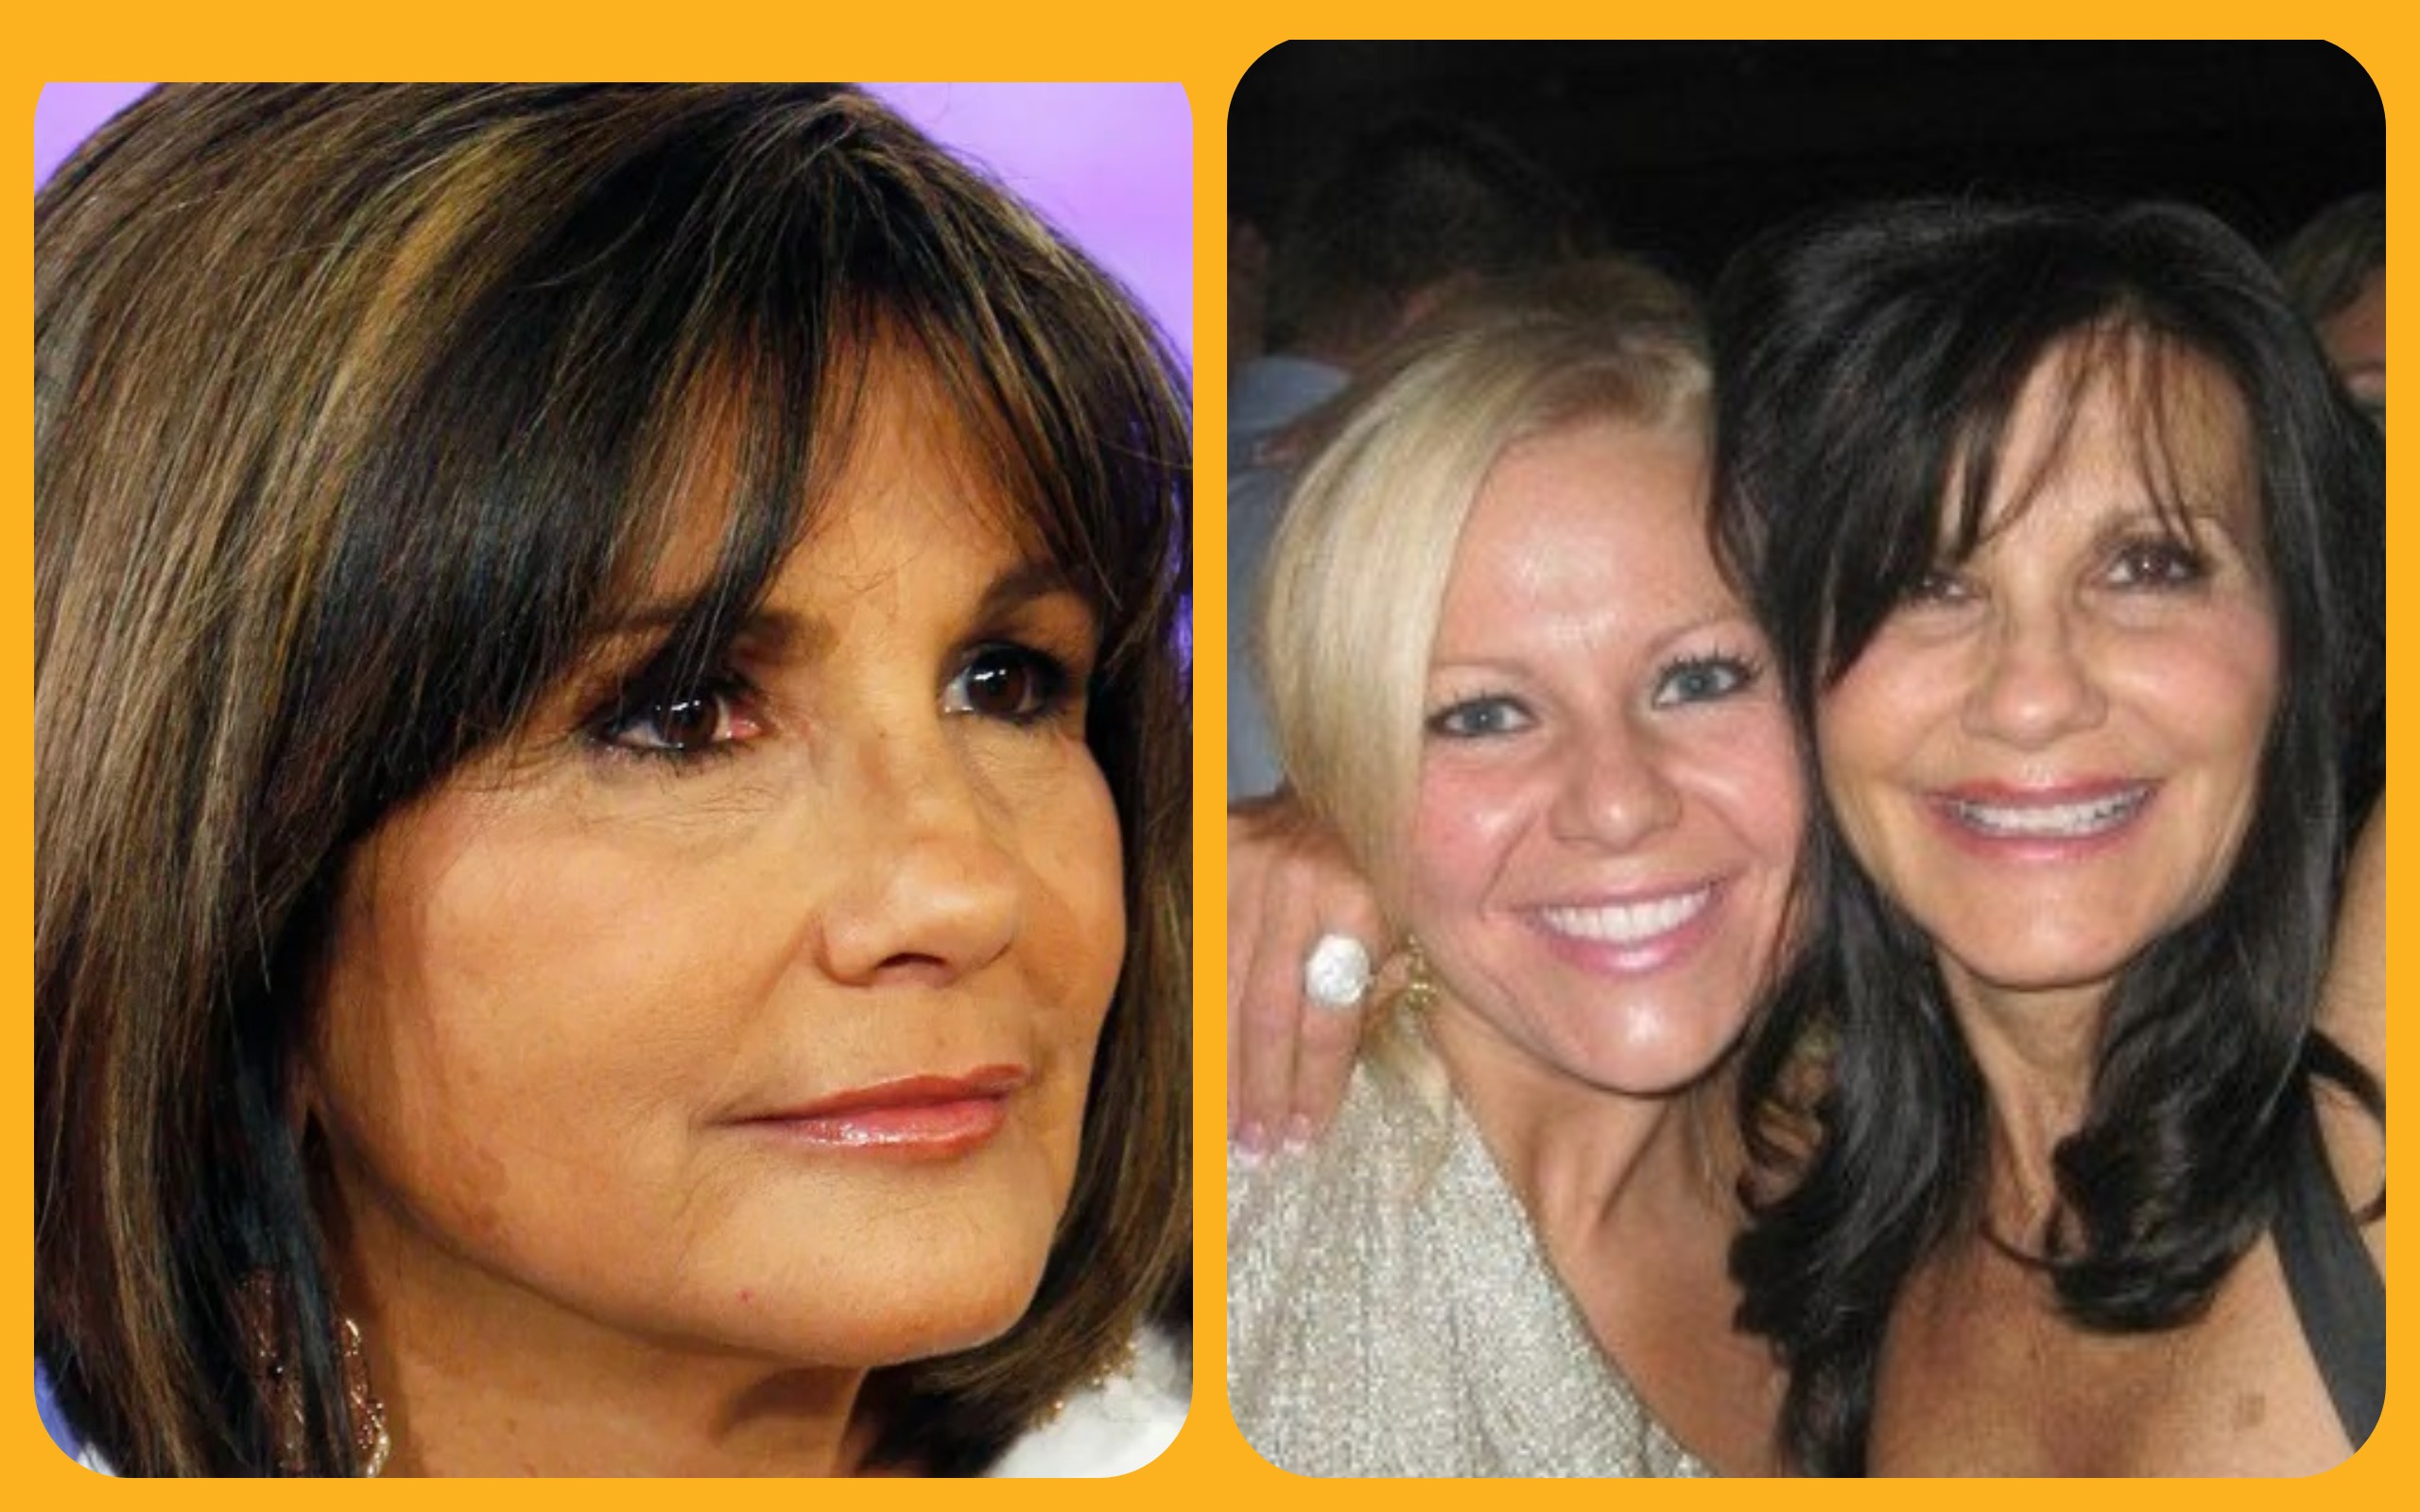 Lynne Spears flies to LA after Britney blames her for hotel drama